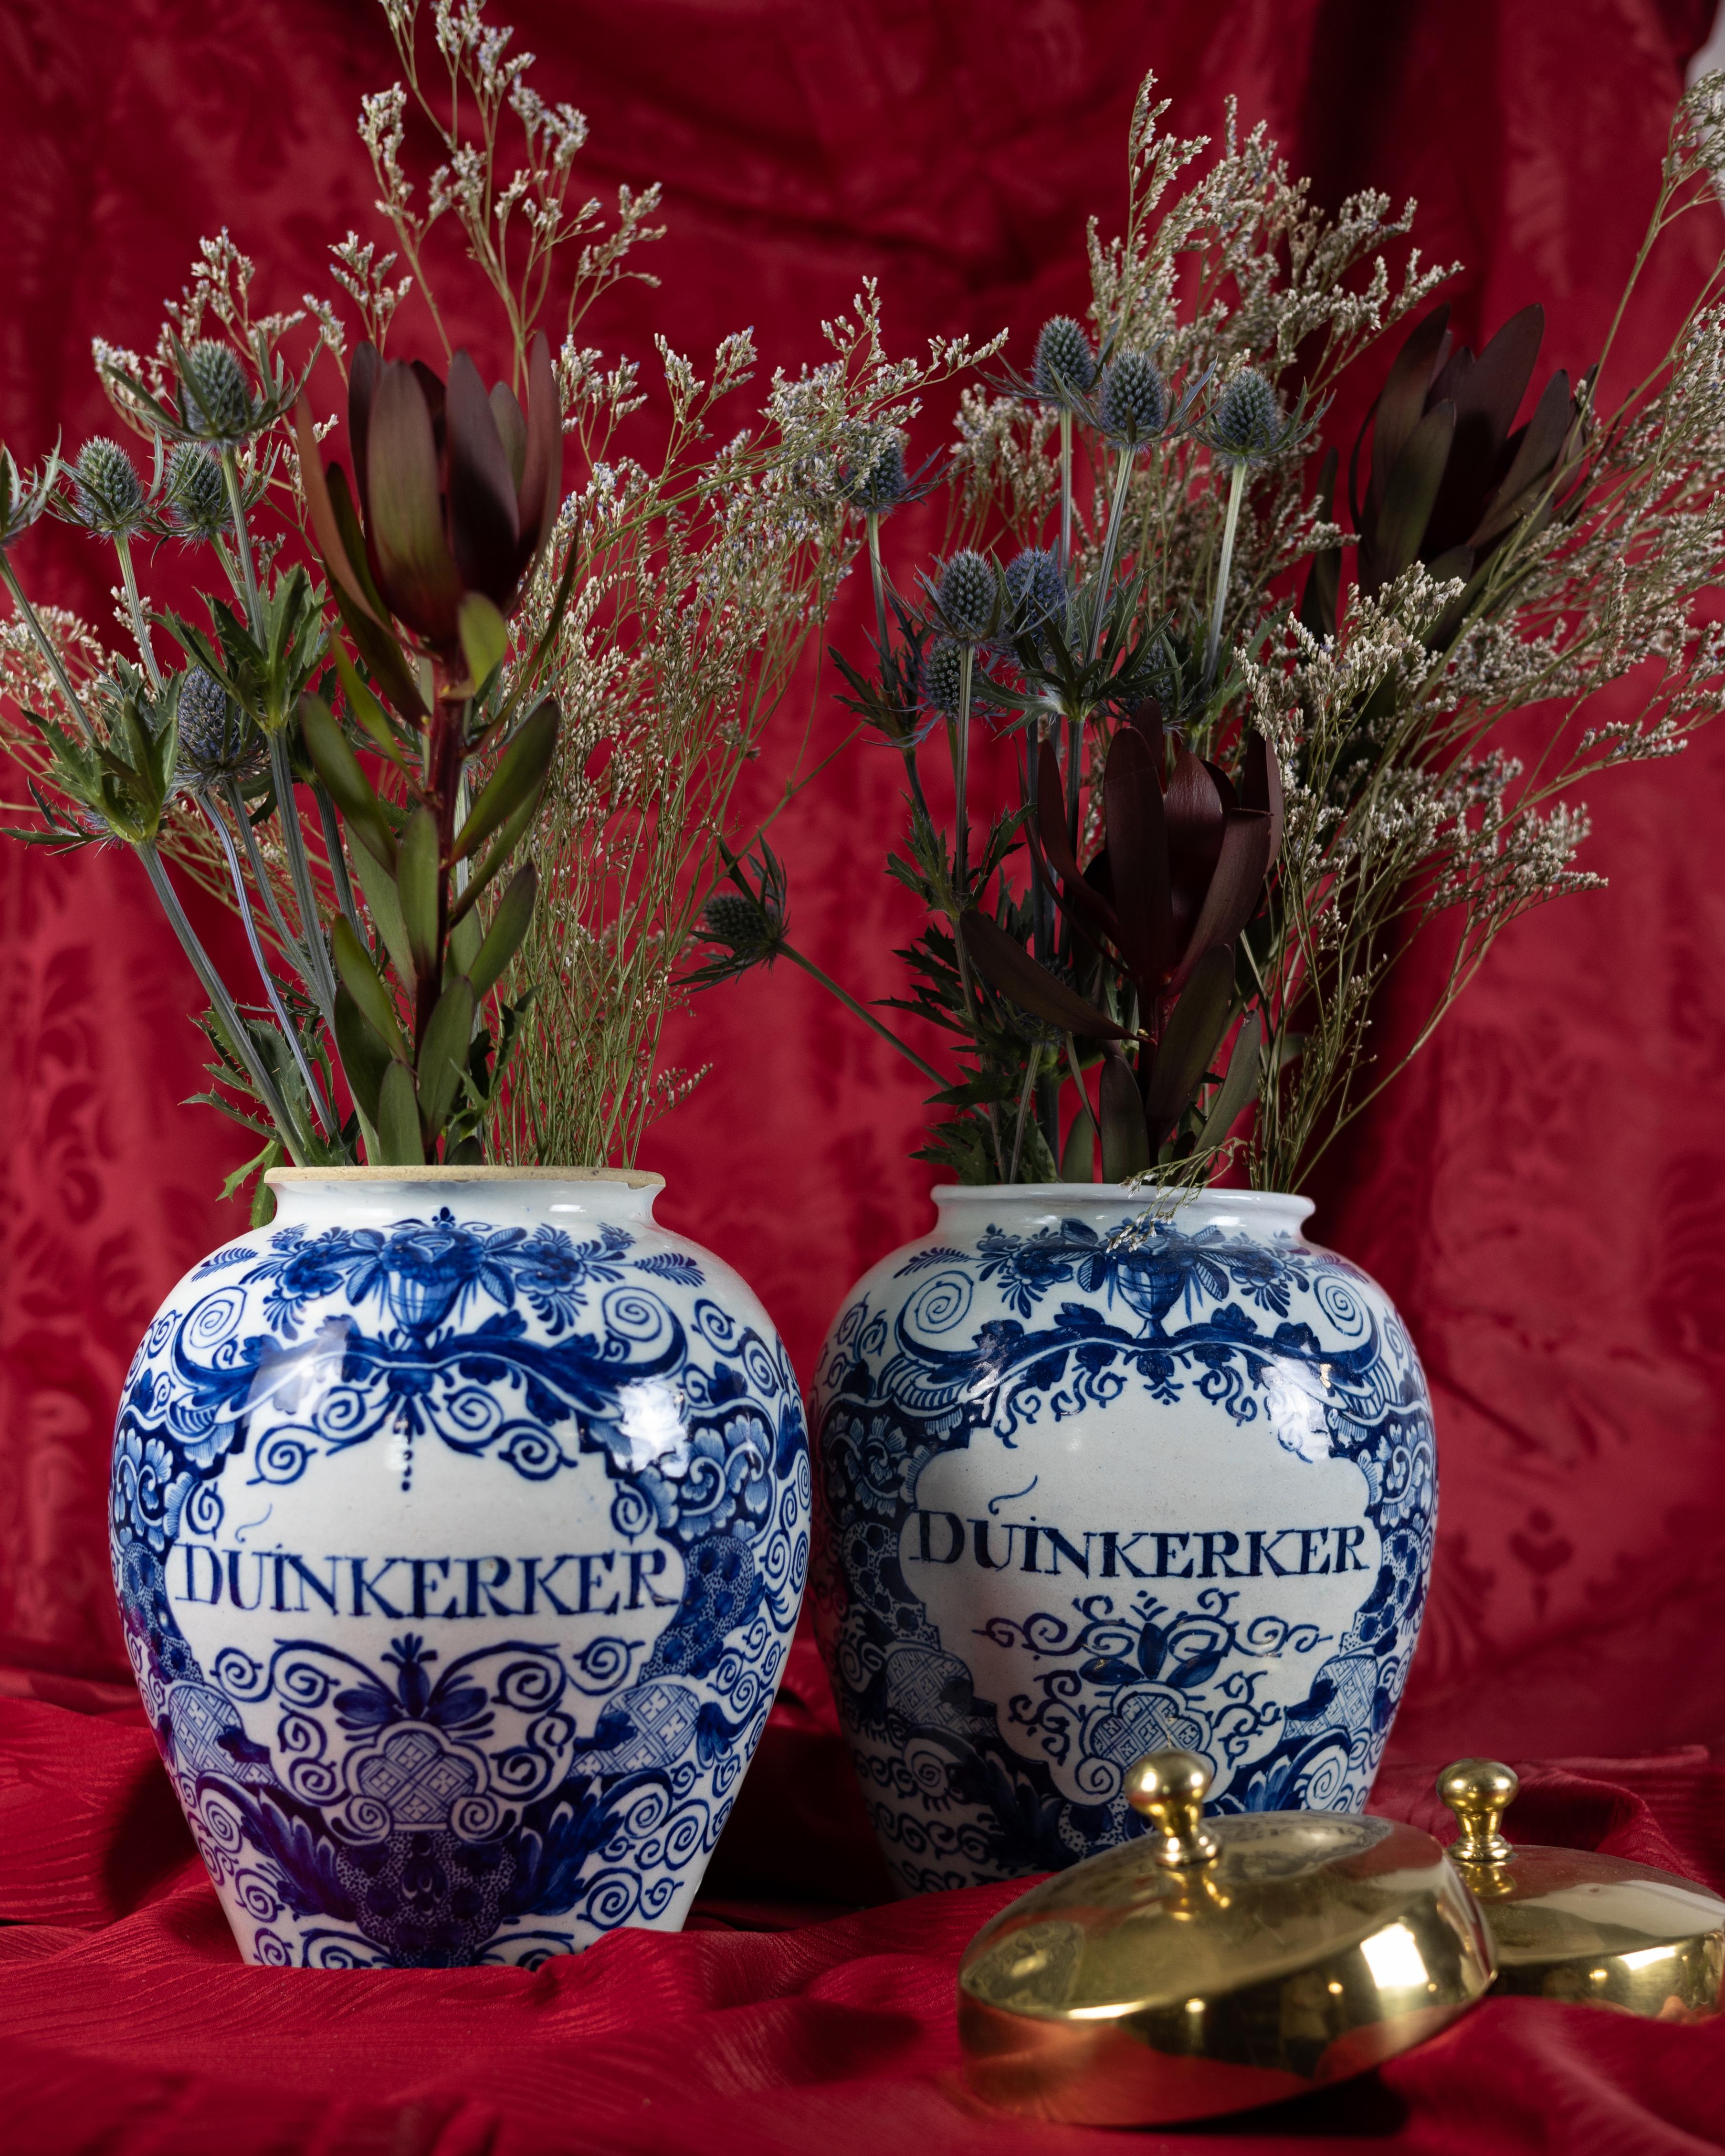 This outstanding pair of Dutch Delft blue and white tobacco jars were made circa 1770 to hold a type of tobacco named 